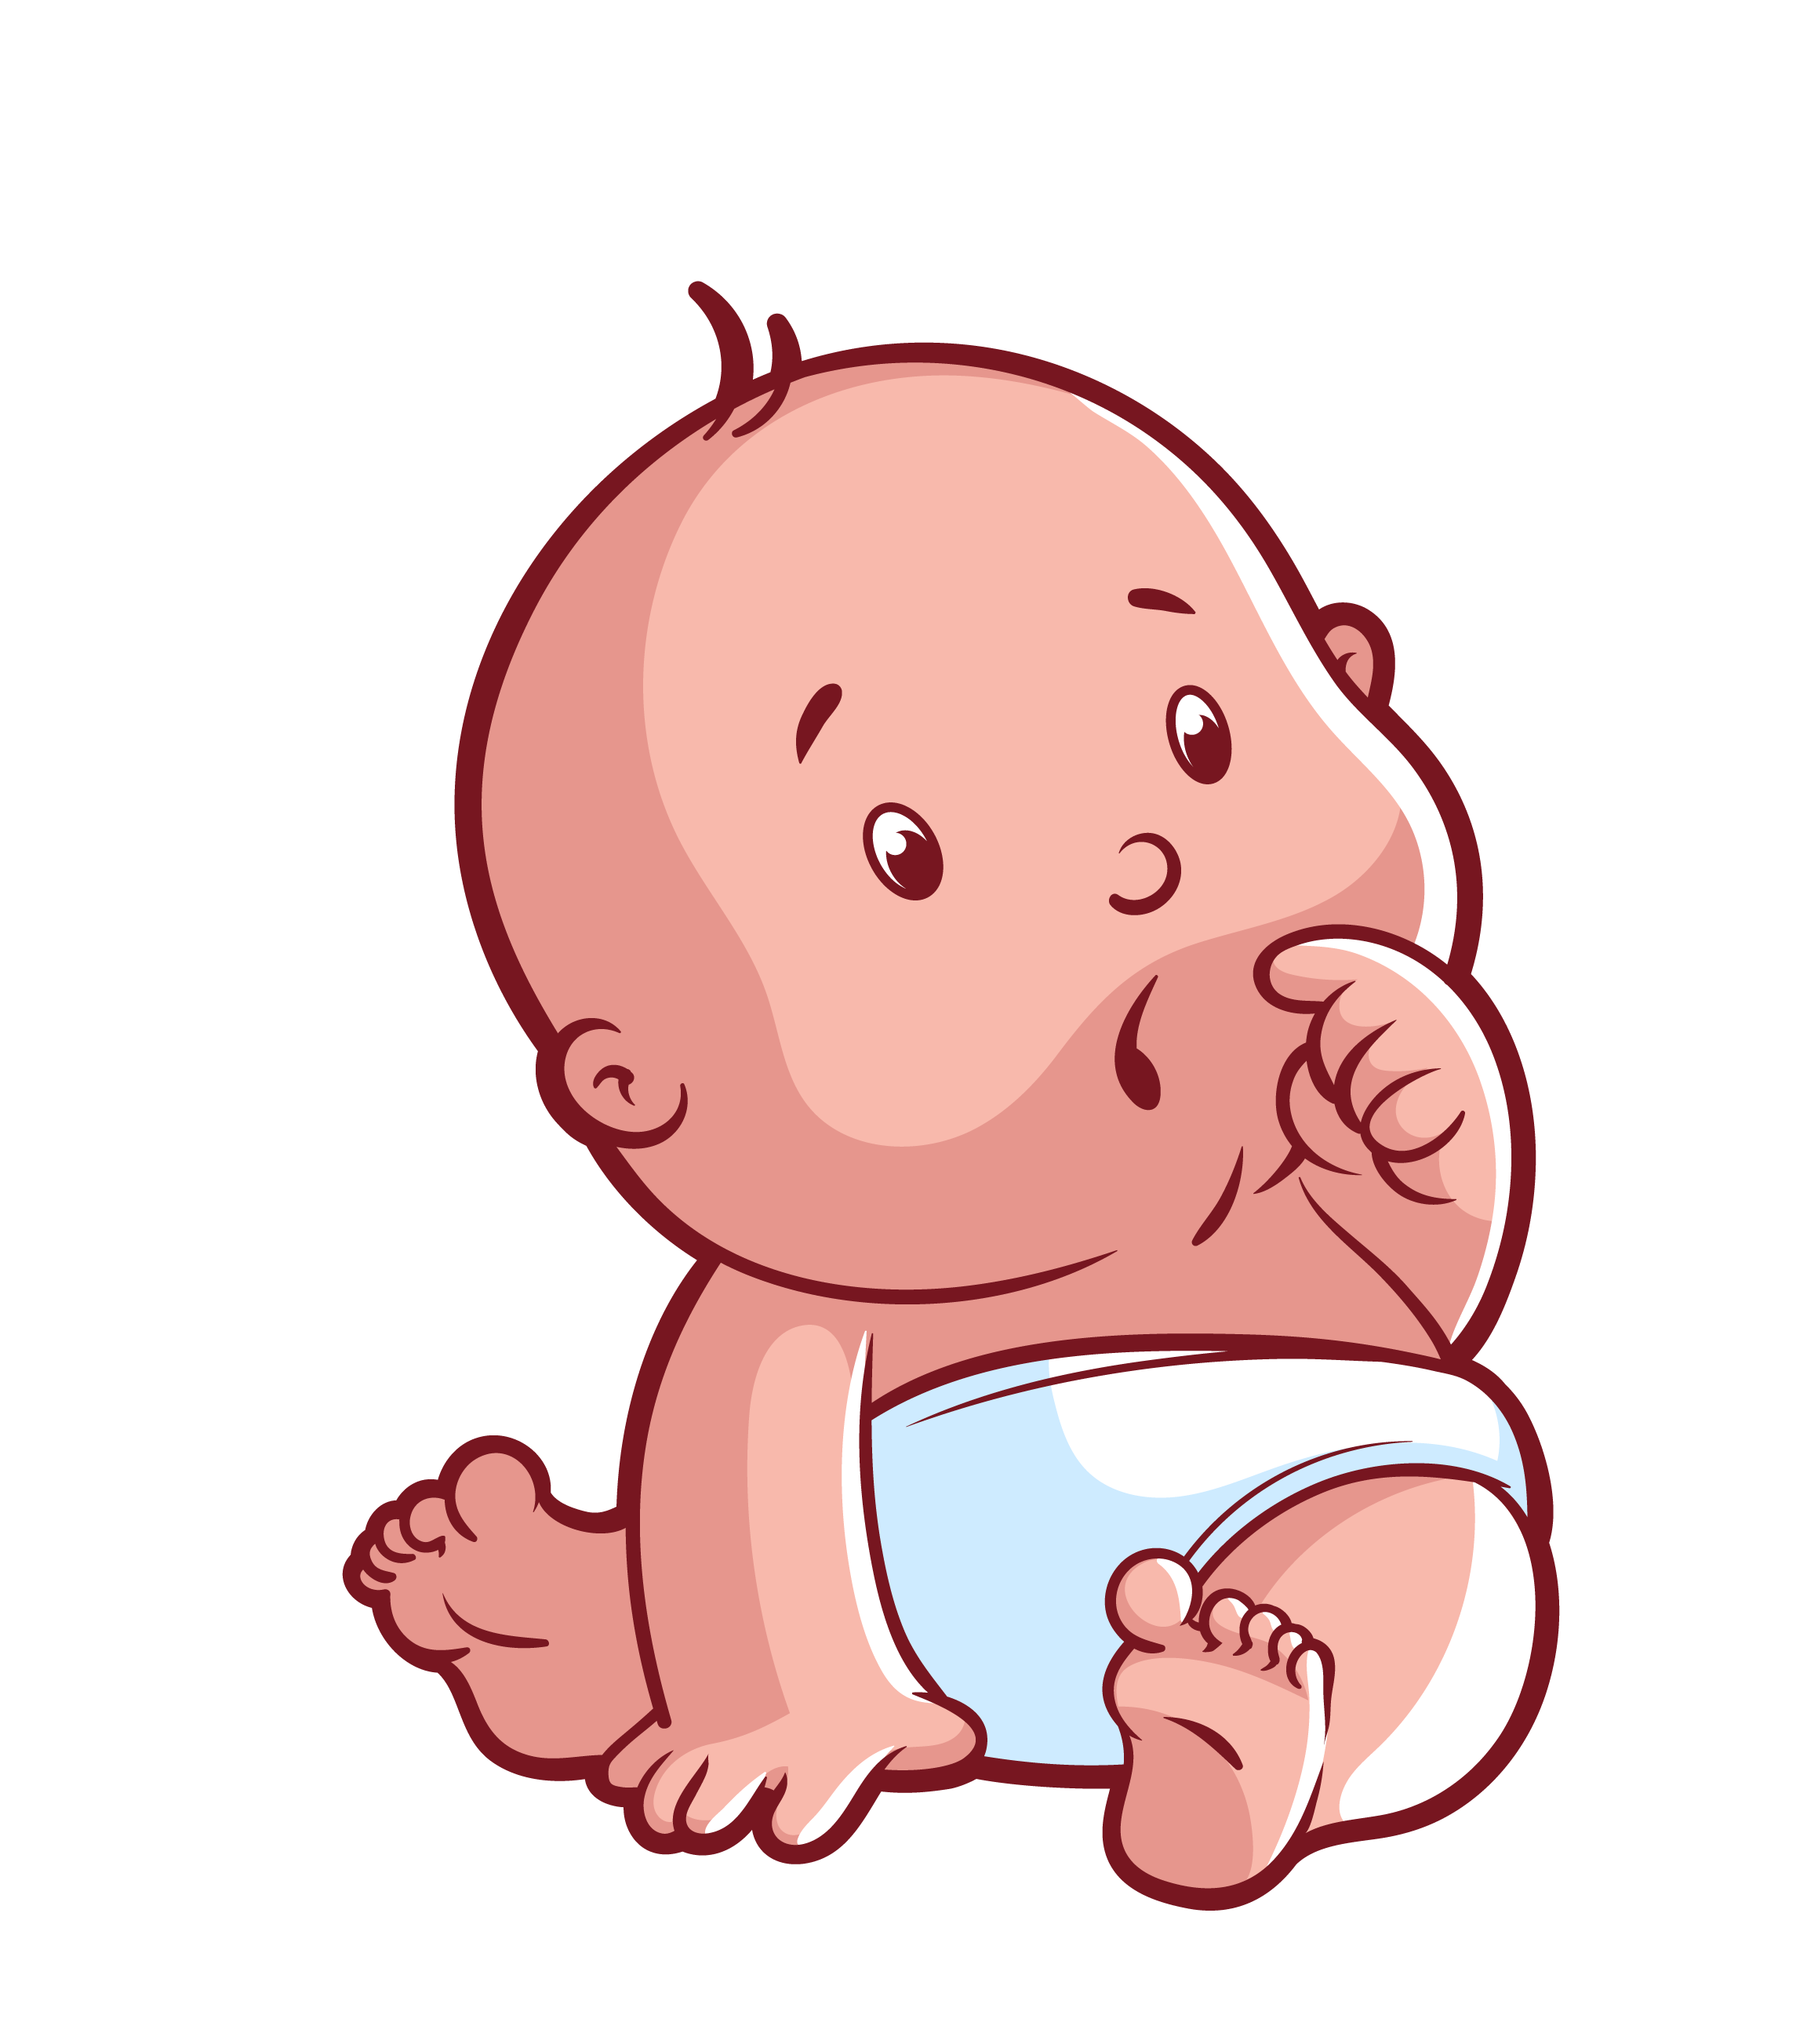 Diaper child care cartoon. Infant clipart baby tummy time